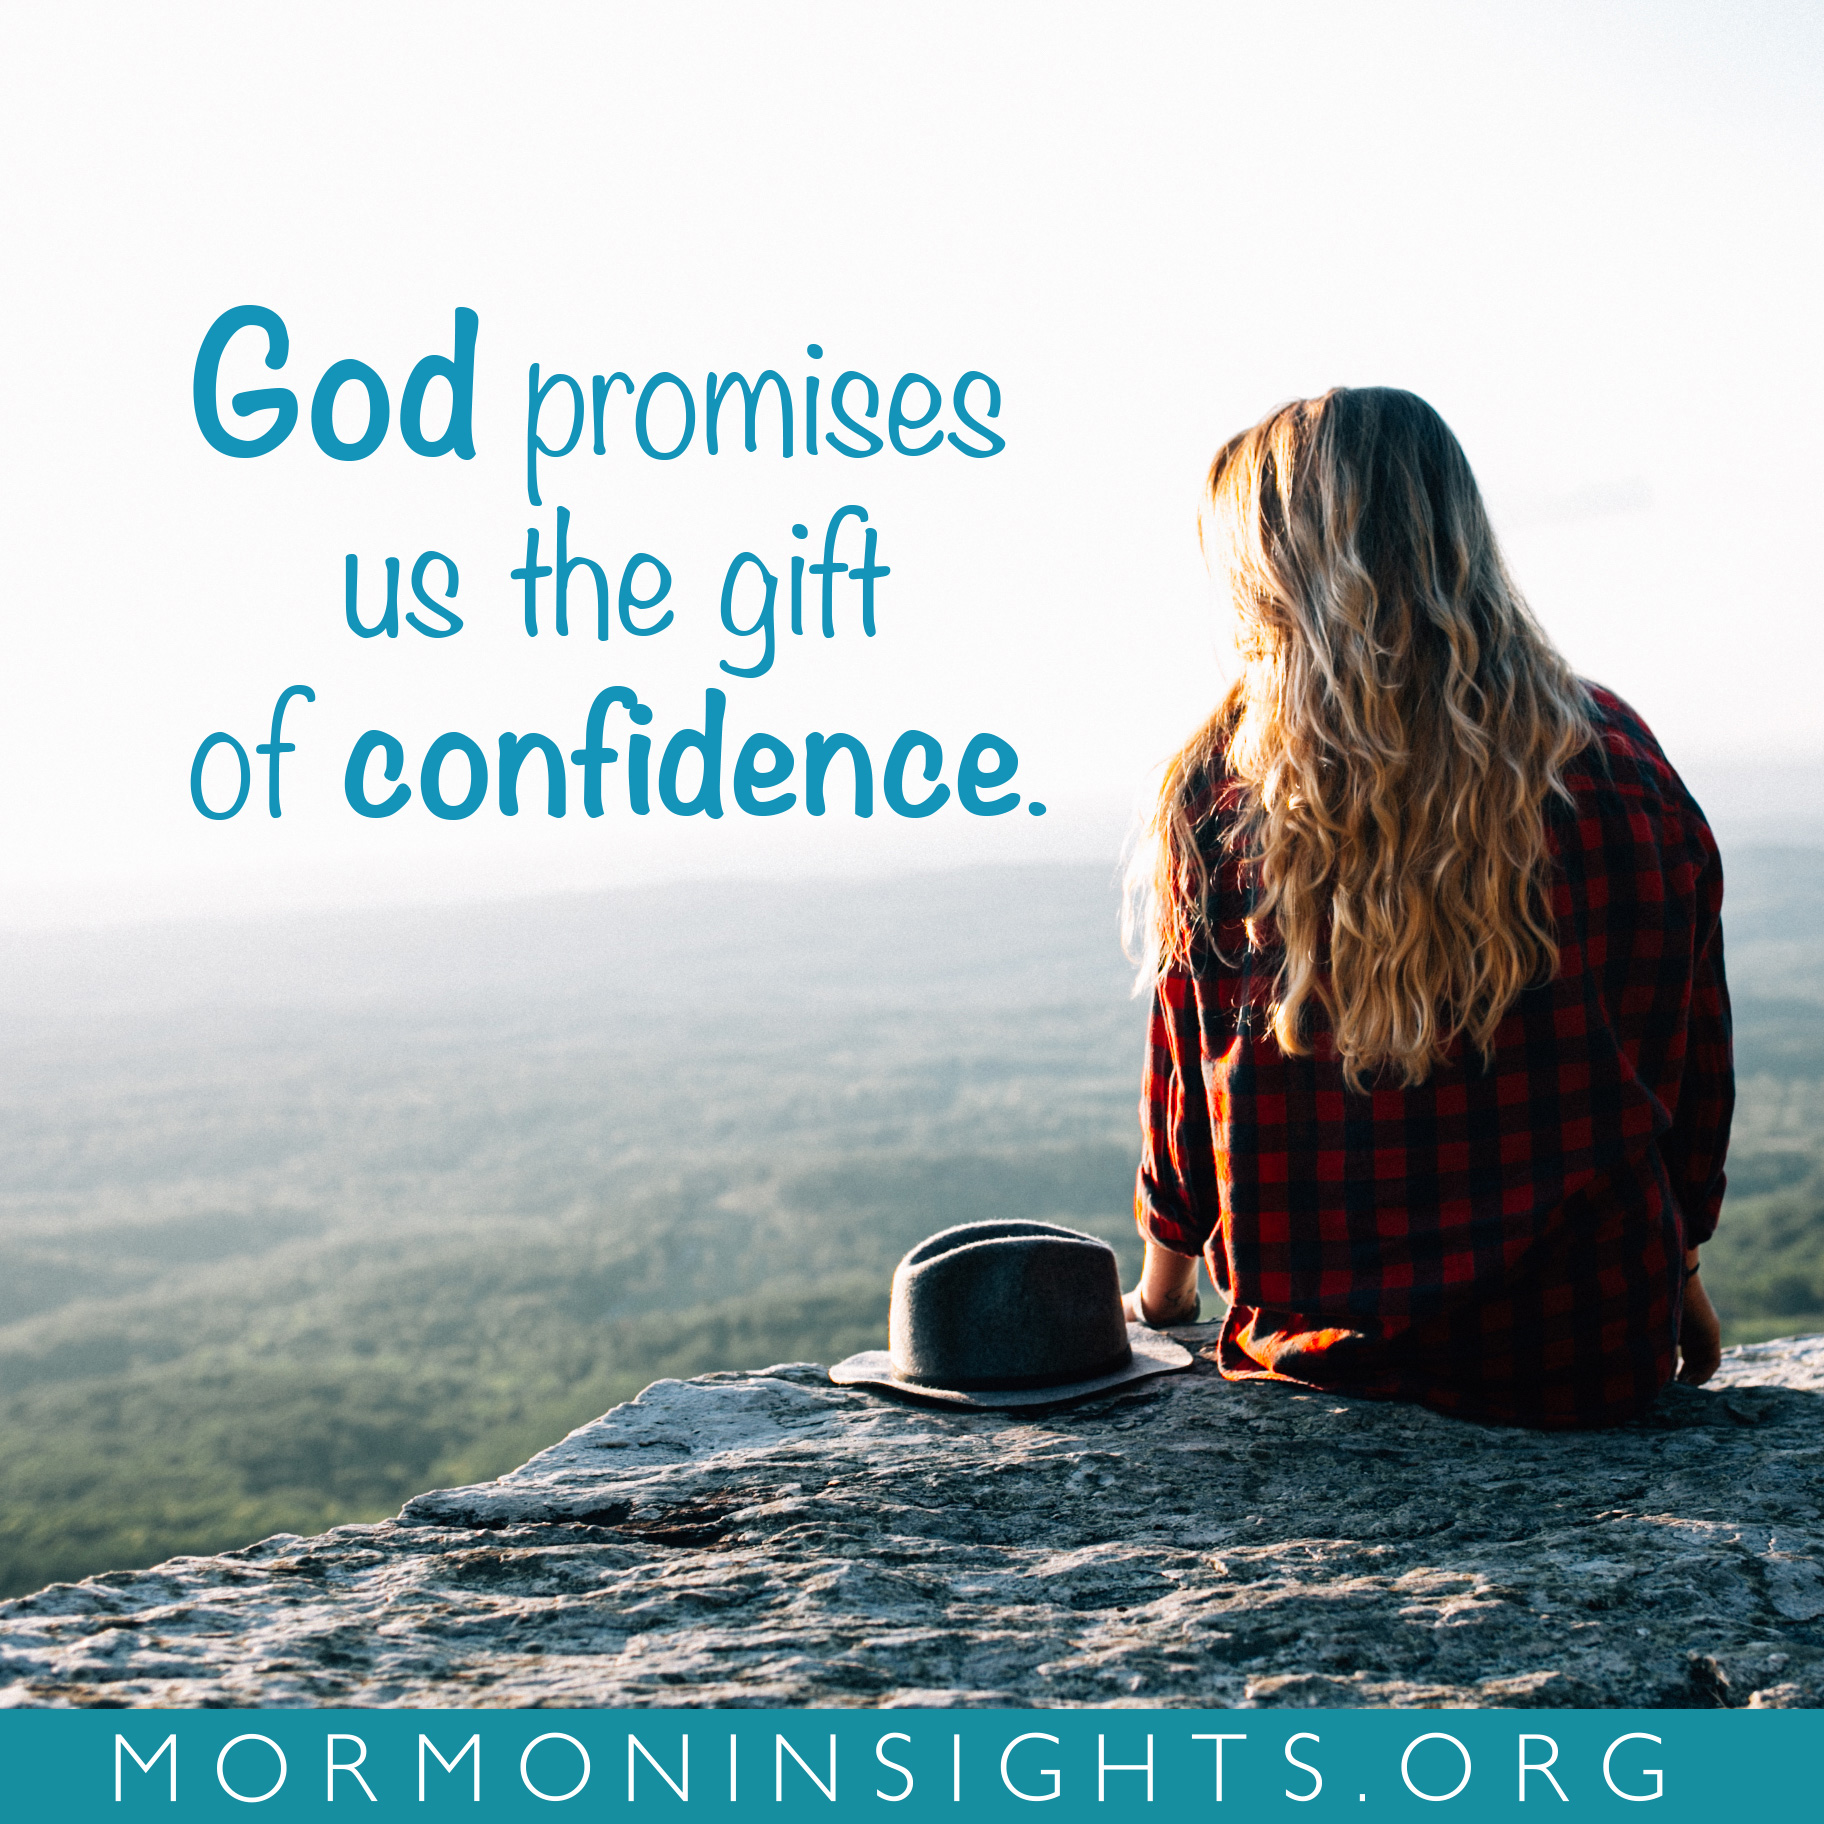 "God promises us the gift of confidence." girl sits on a rock, looking out into distance.